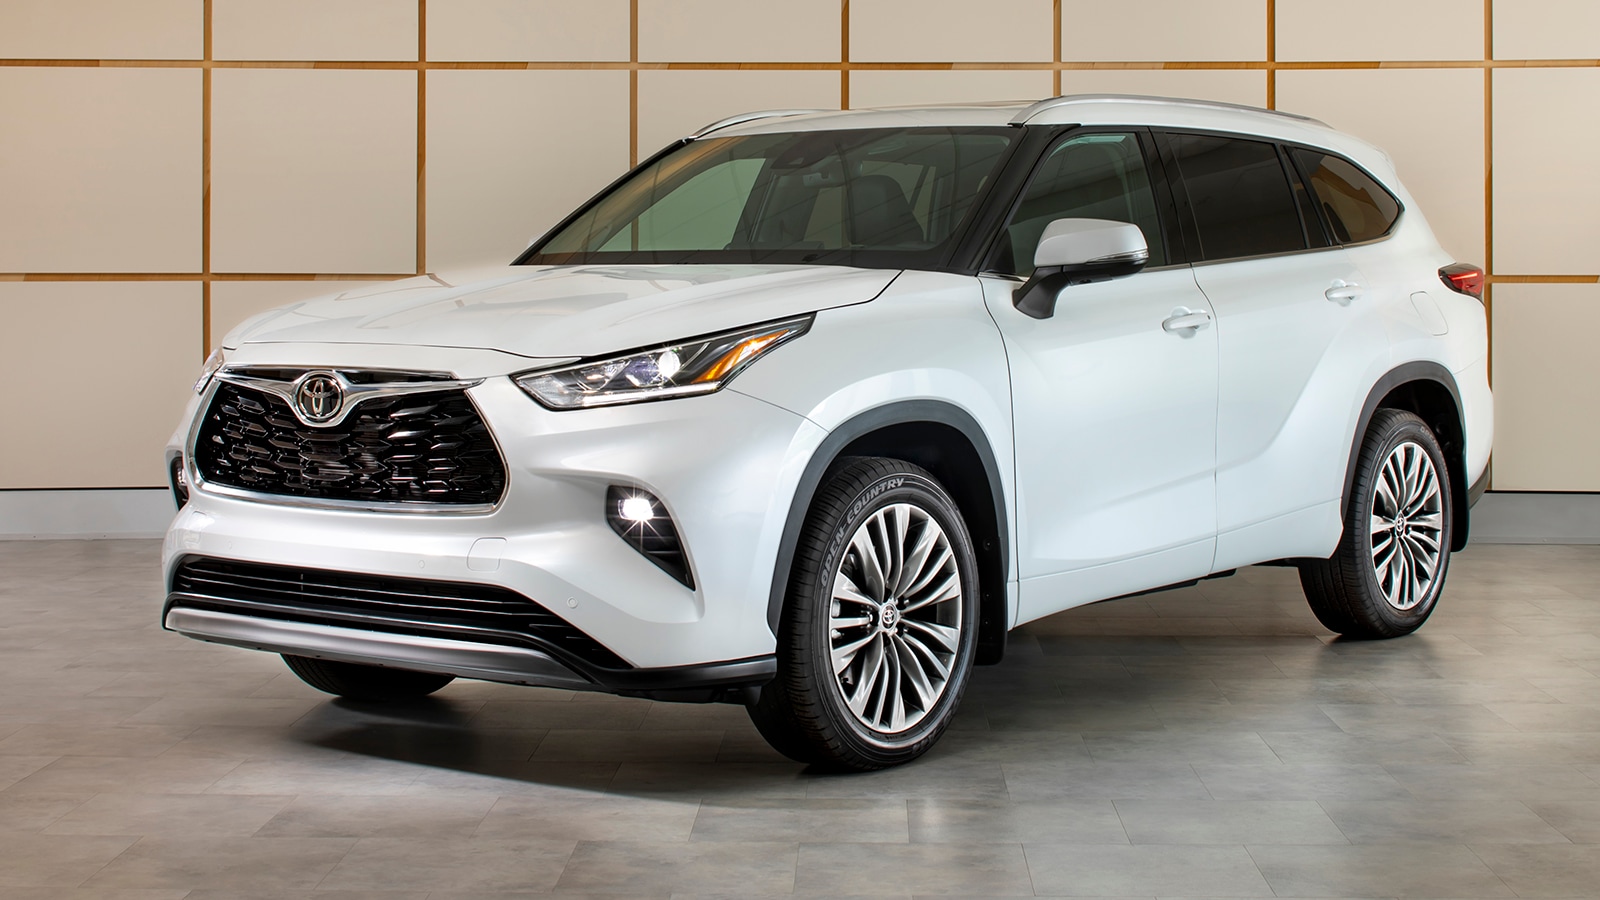 2023 Toyota Highlander Prices, Reviews, and Photos - MotorTrend